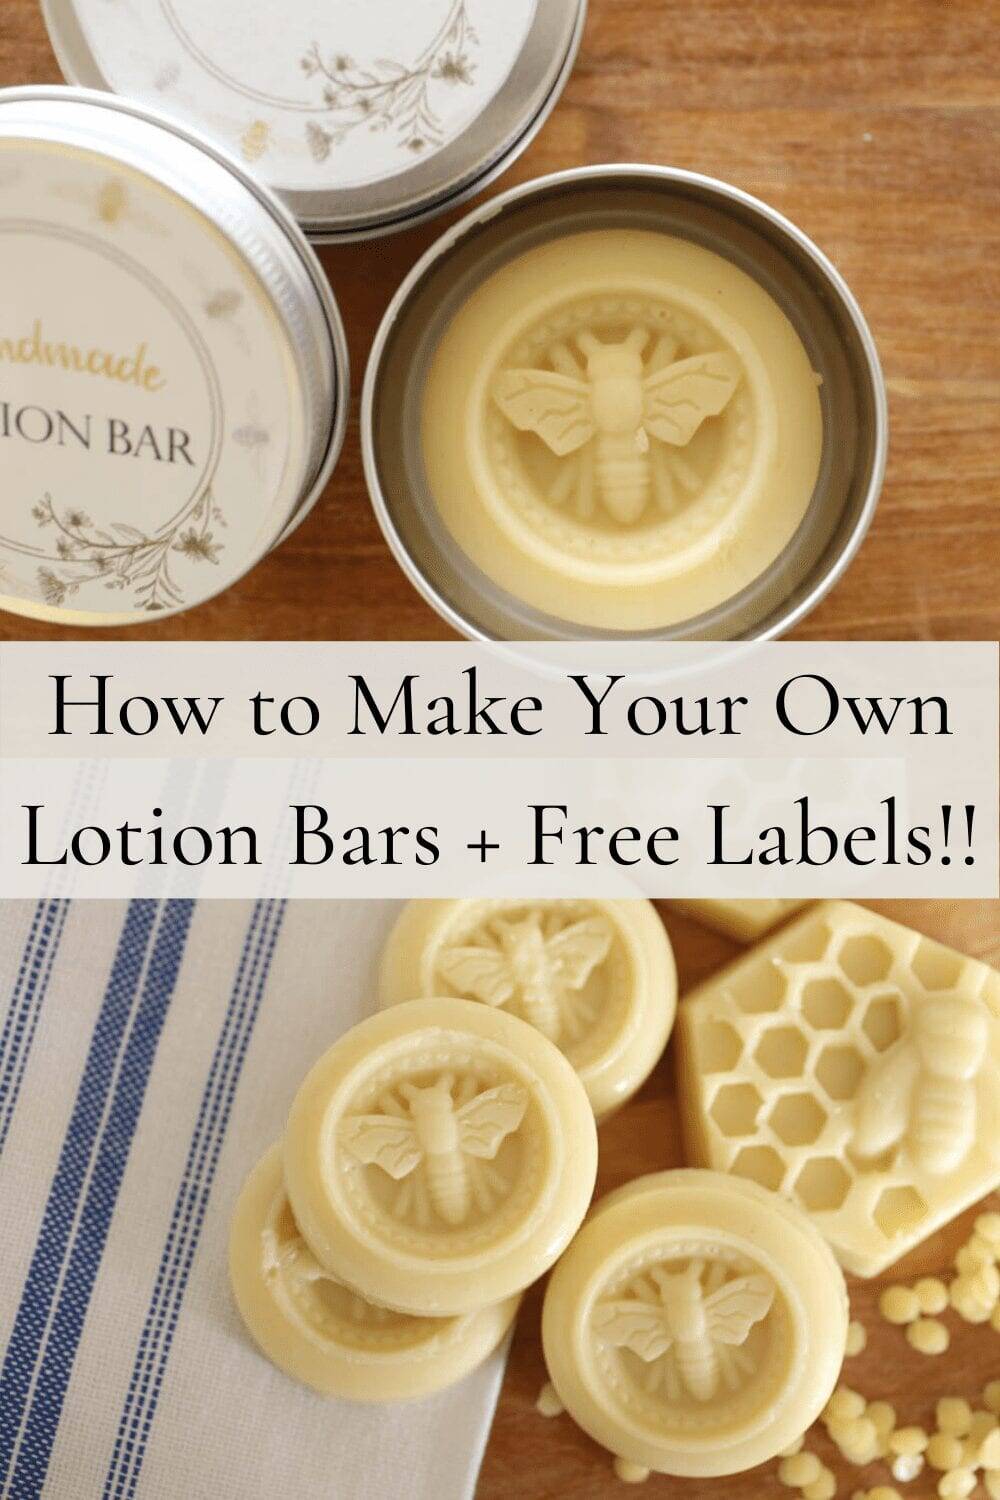 How to Make Lotion Bars (A Simple Lotion Bar Recipe) - No Fuss